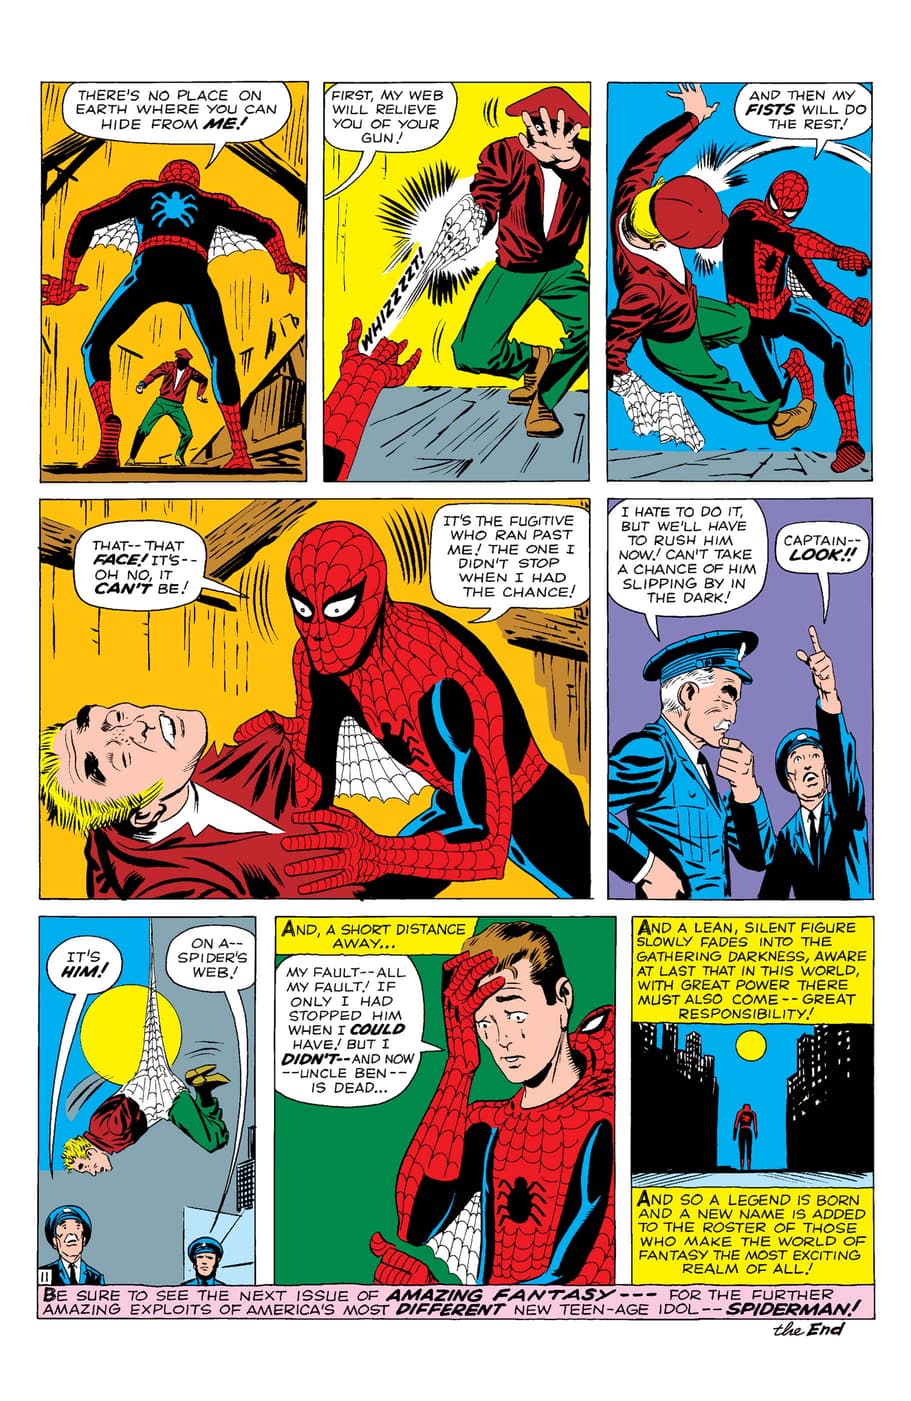 “With great power there must also come -- great responsibility!” – AMAZING FANTASY (1962) #15